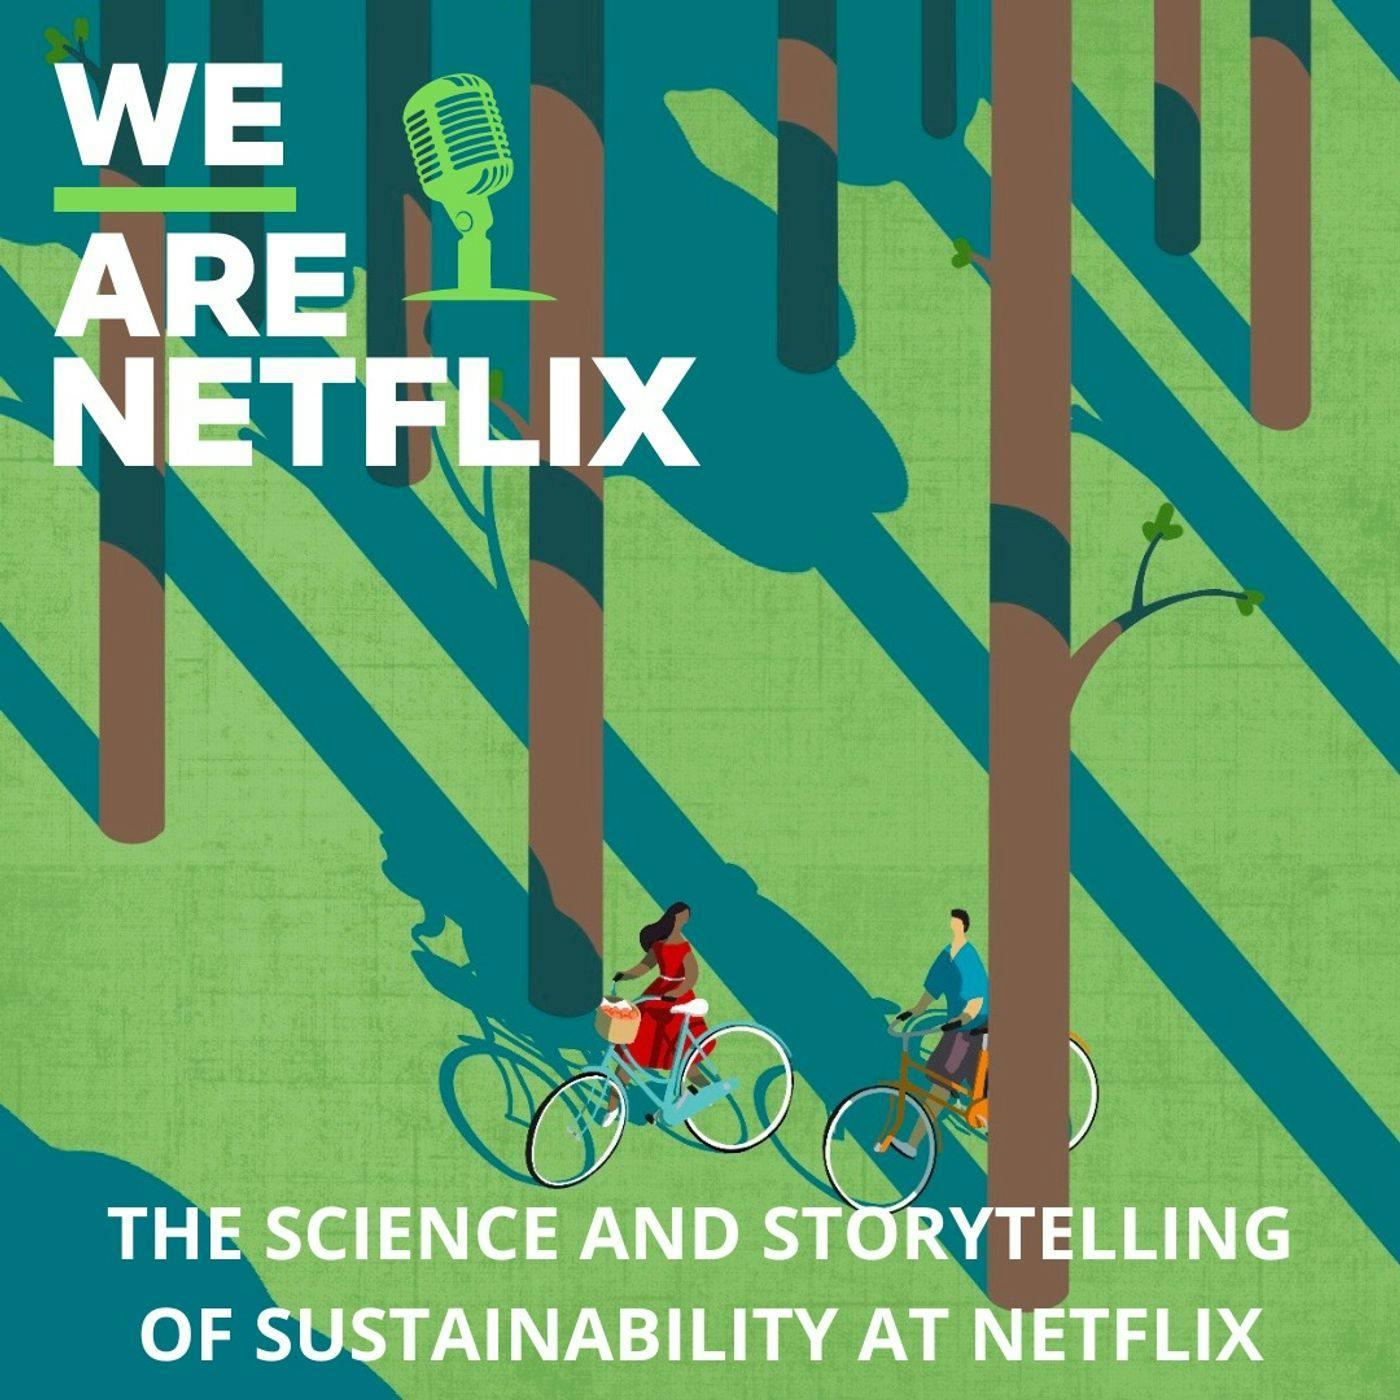 The Science and Storytelling of Sustainability at Netflix